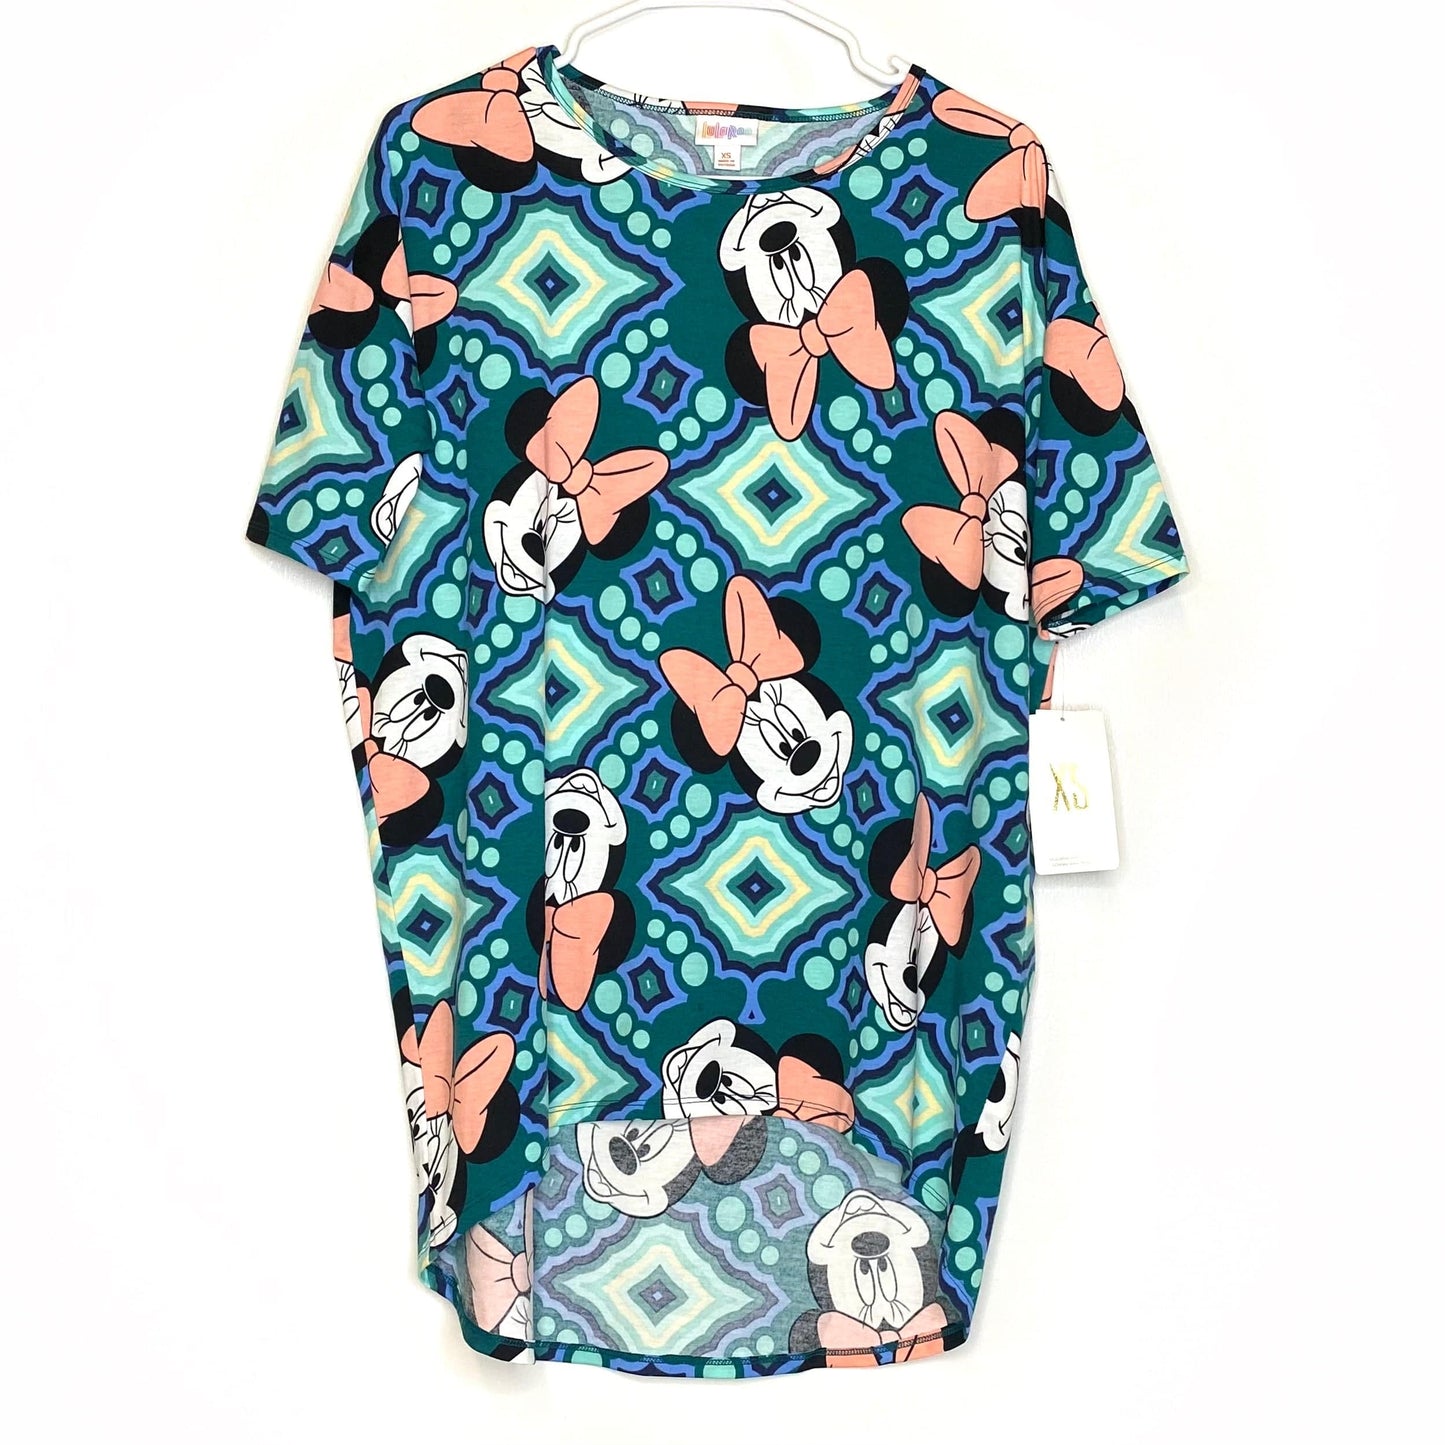 LuLaRoe Womens Size XS Blue/Green ‘Minnie Mouse’ Irma Graphic S/s Top NWT